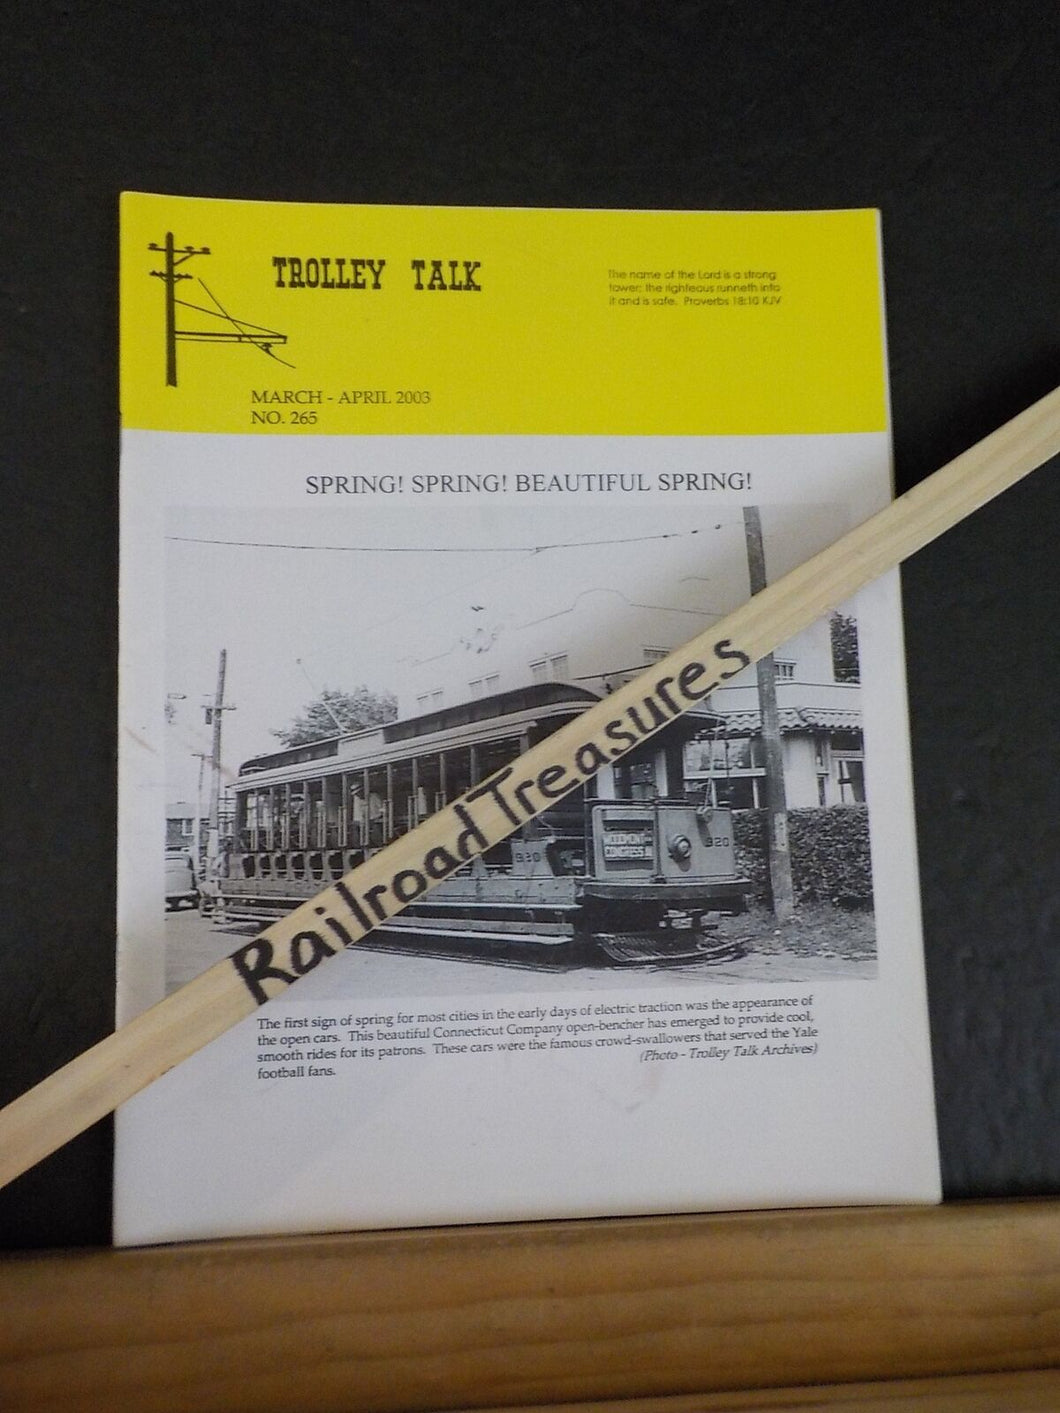 Trolley Talk #265 2003 March April Tampa’s streetcars roll again. All aboard for